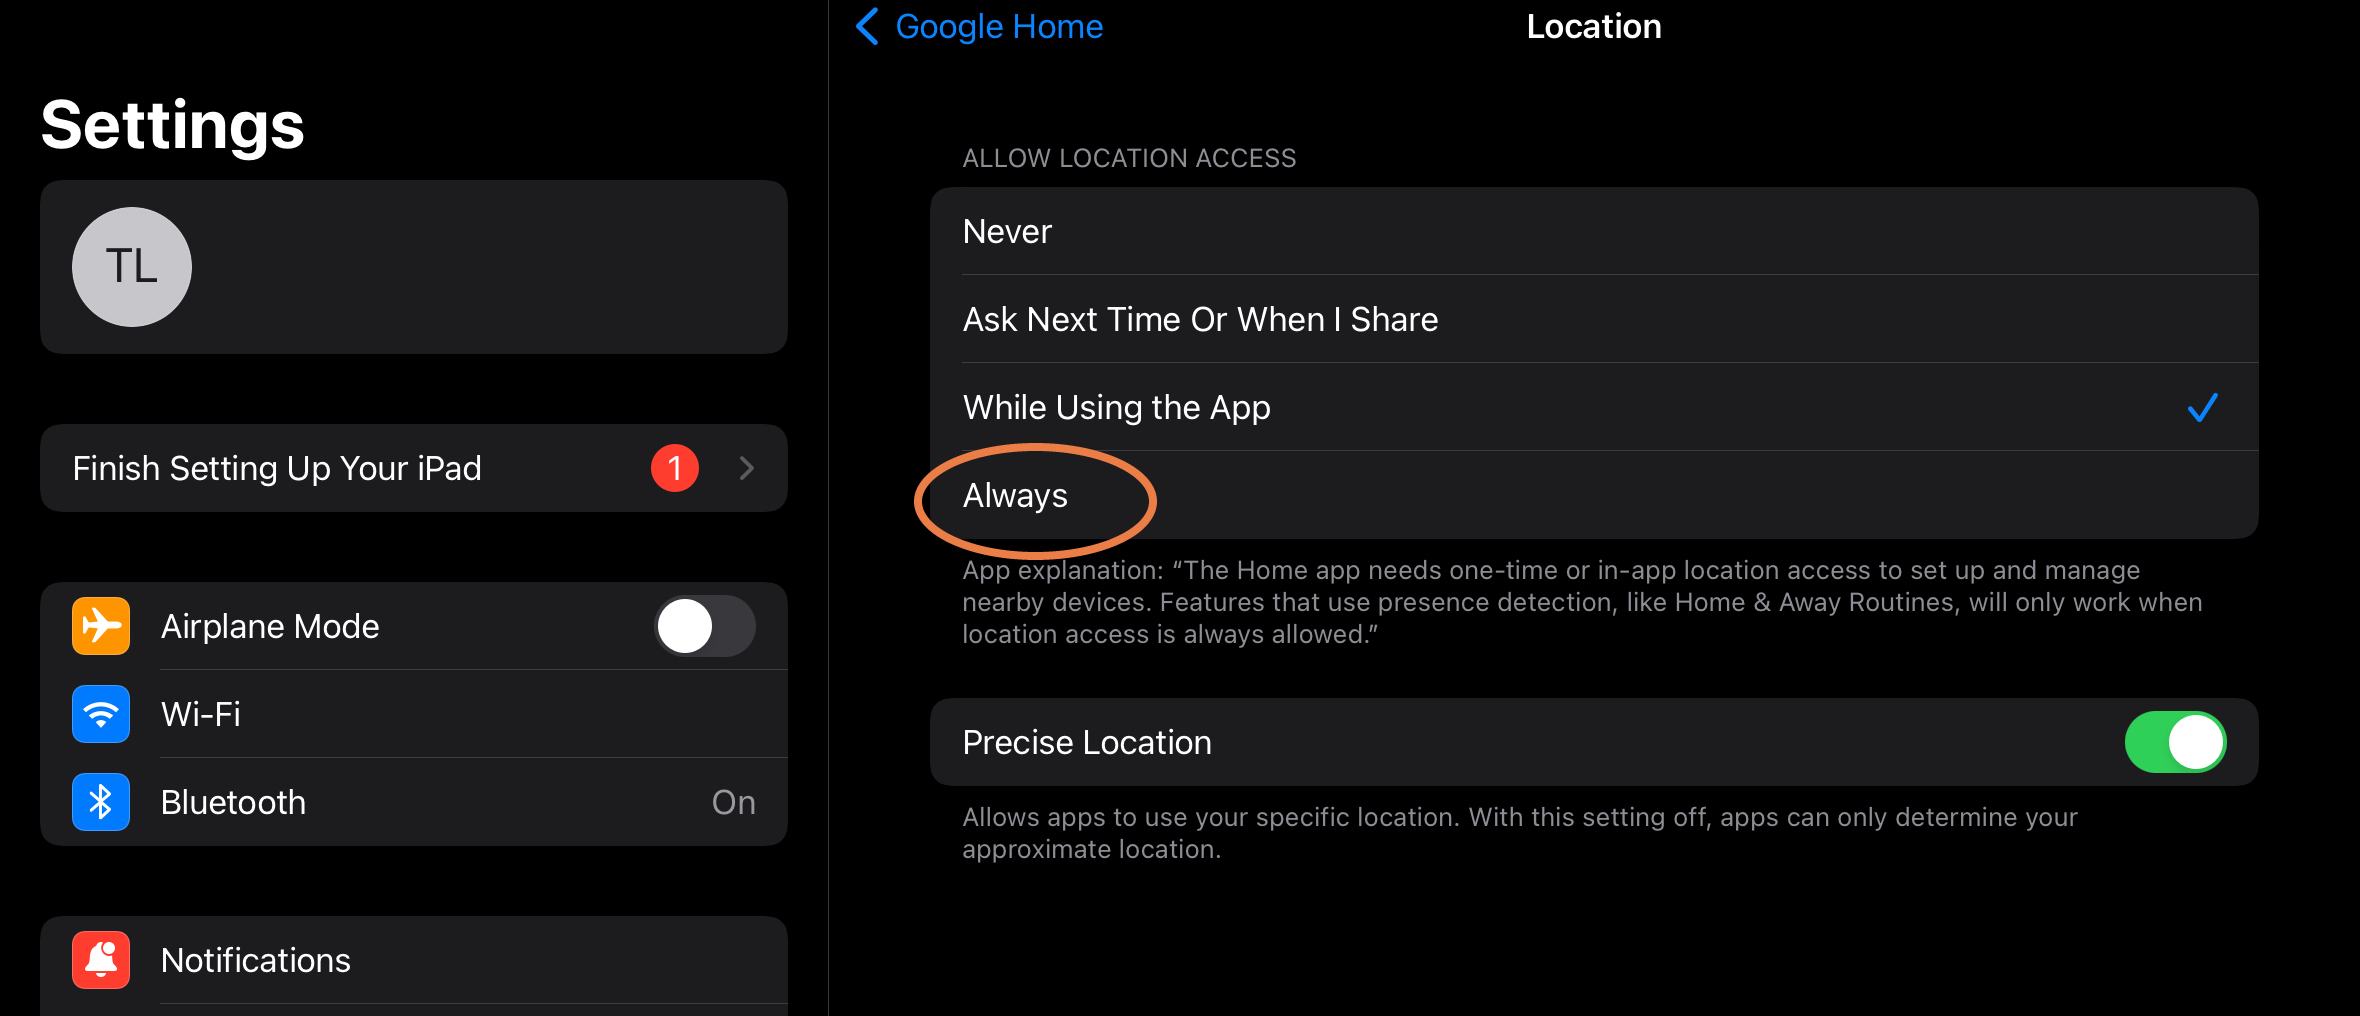 Google Home Location Services.